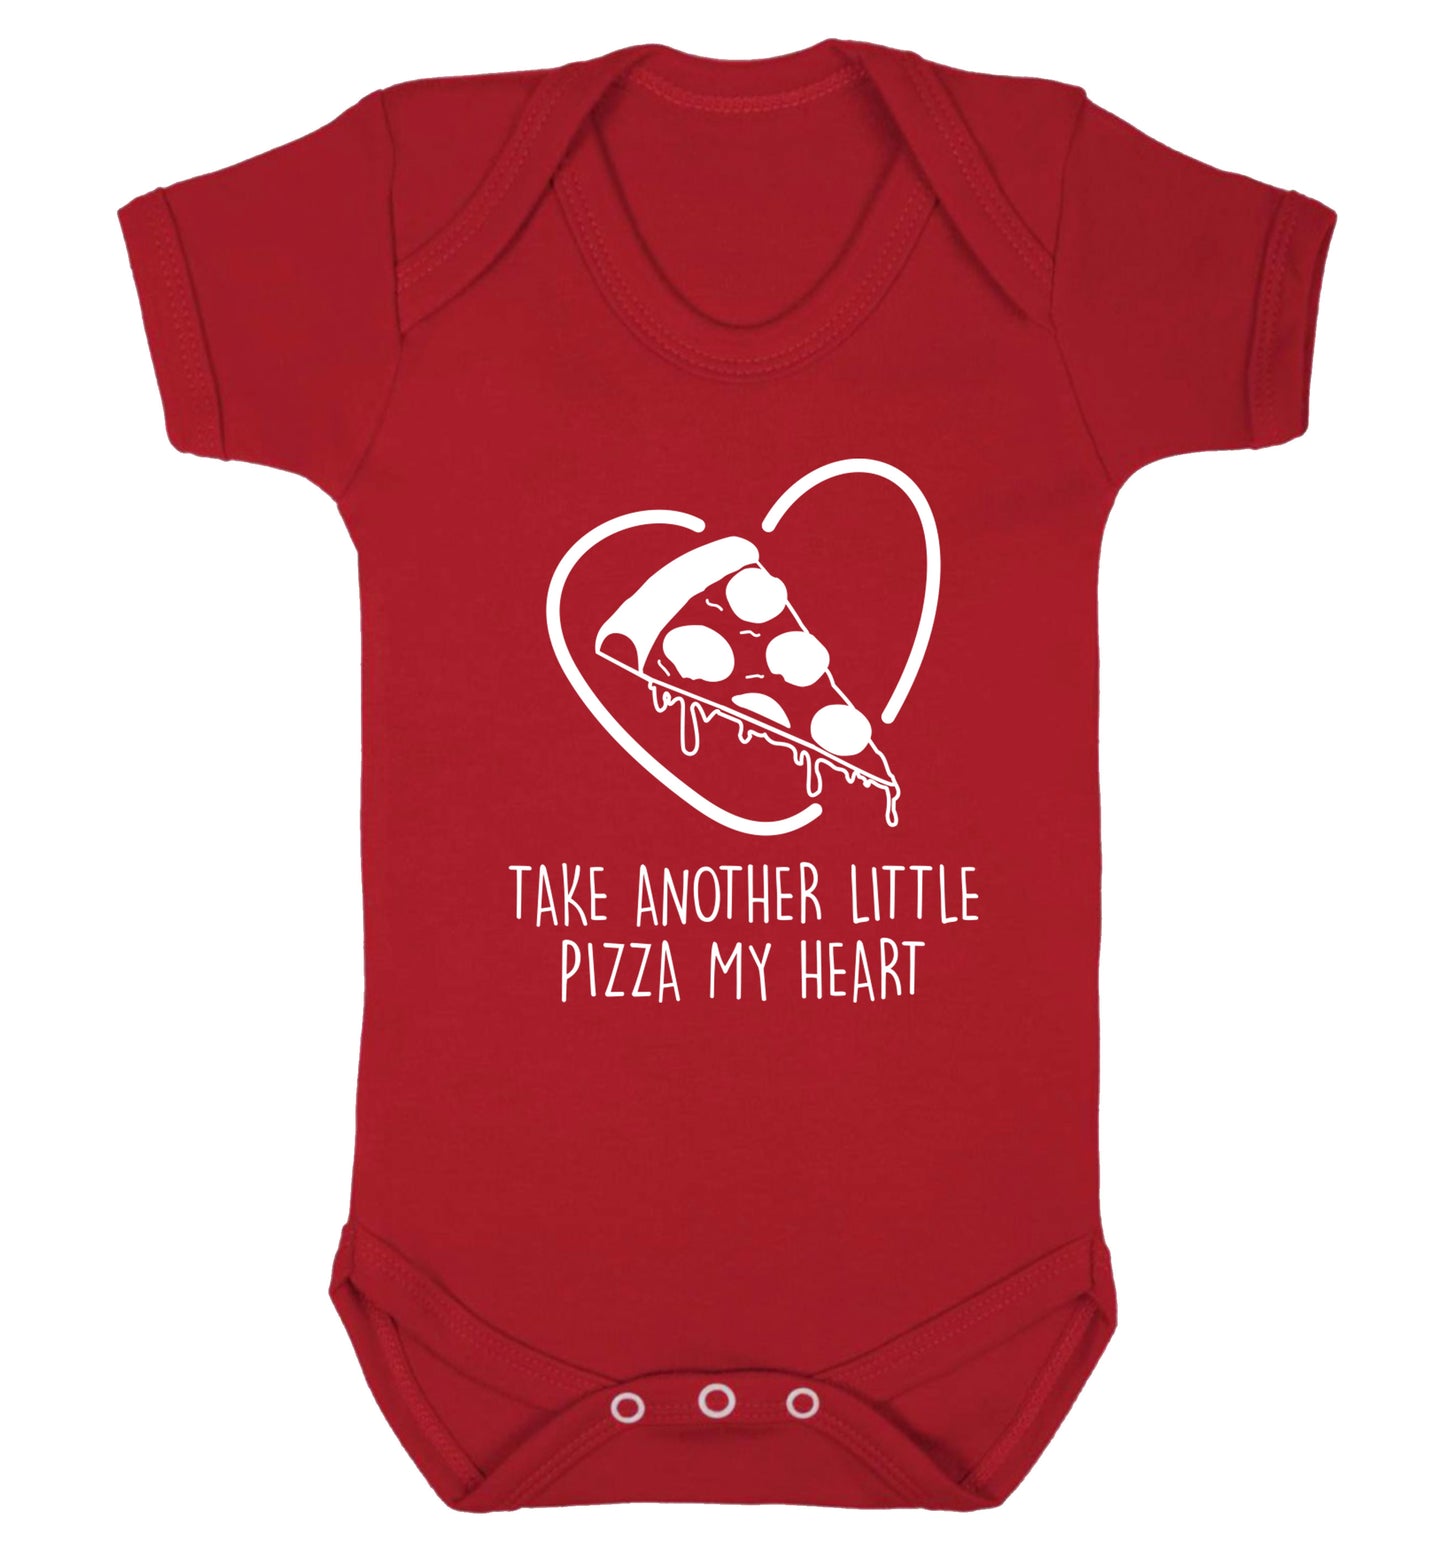 Take another little pizza my heart Baby Vest red 18-24 months